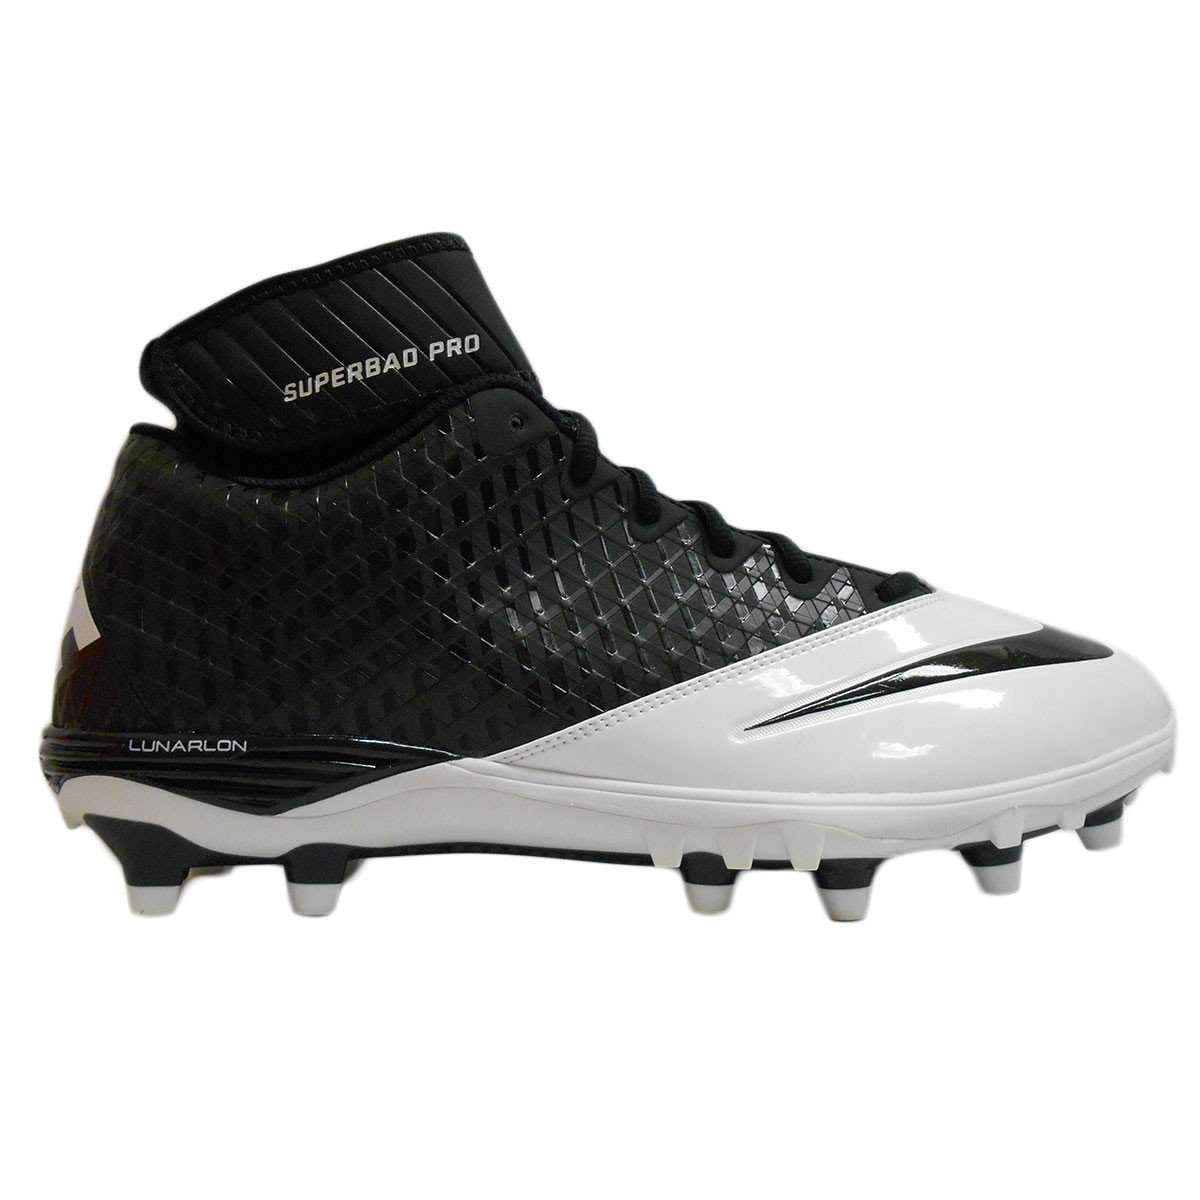 nike superbad cleats 2012